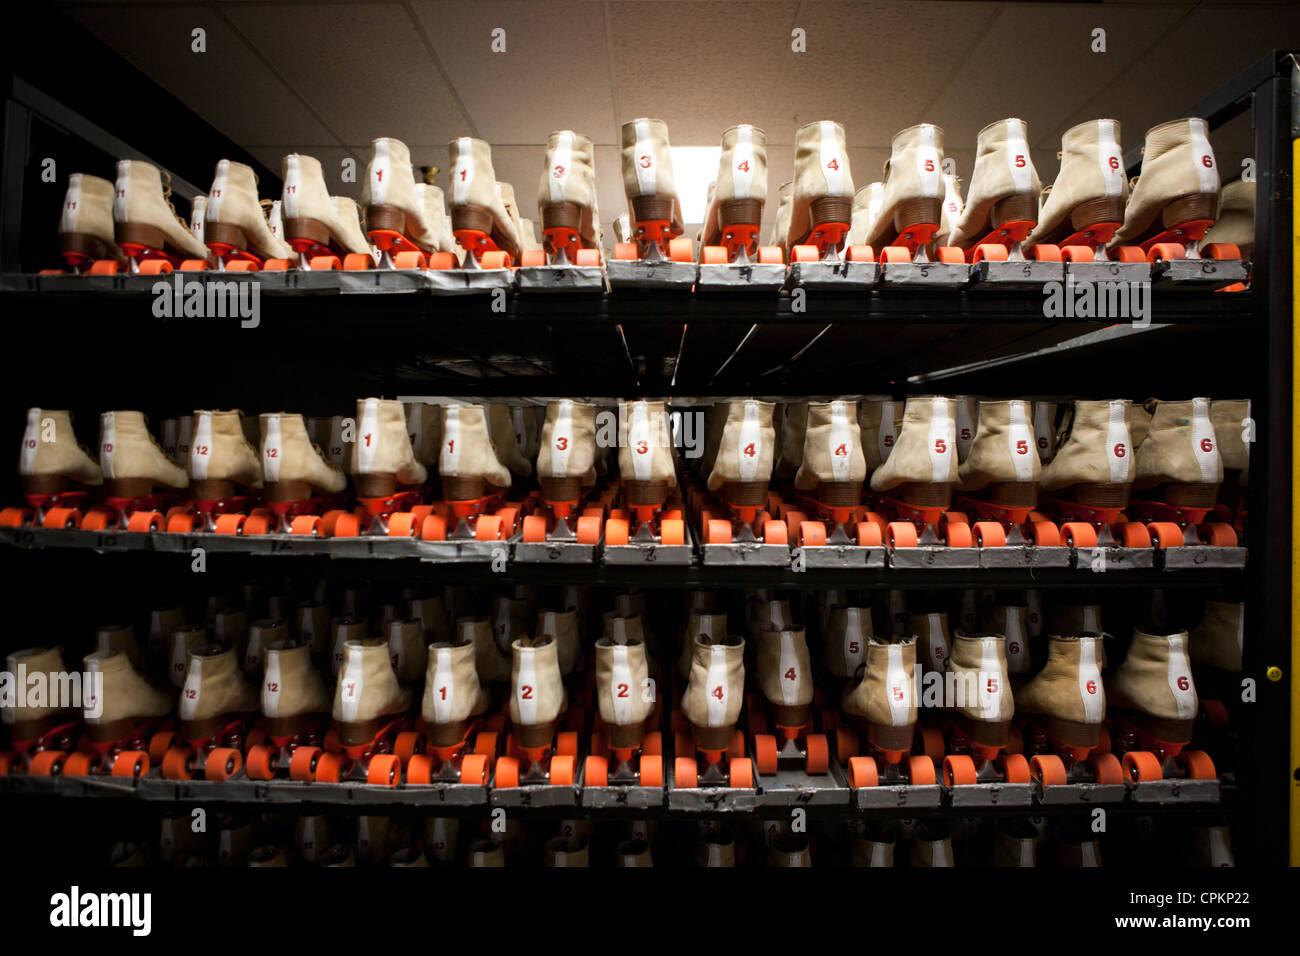 A wall of roller skates. Stock Photo